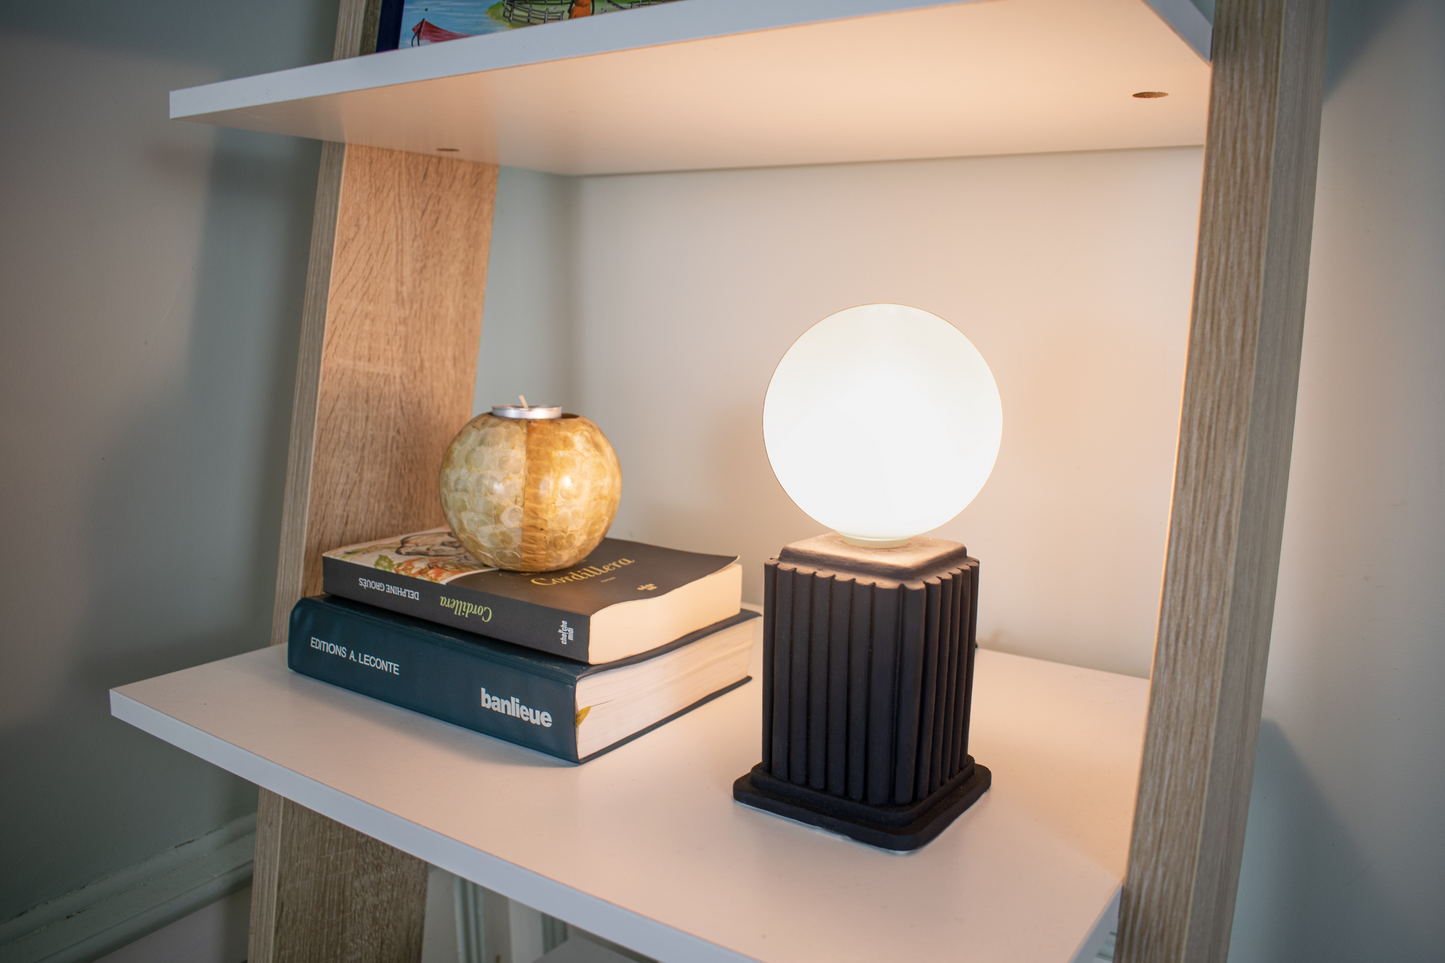 Black Heera | Small Table Lamp with Rectangular Base and a Glass Orb Light Shade